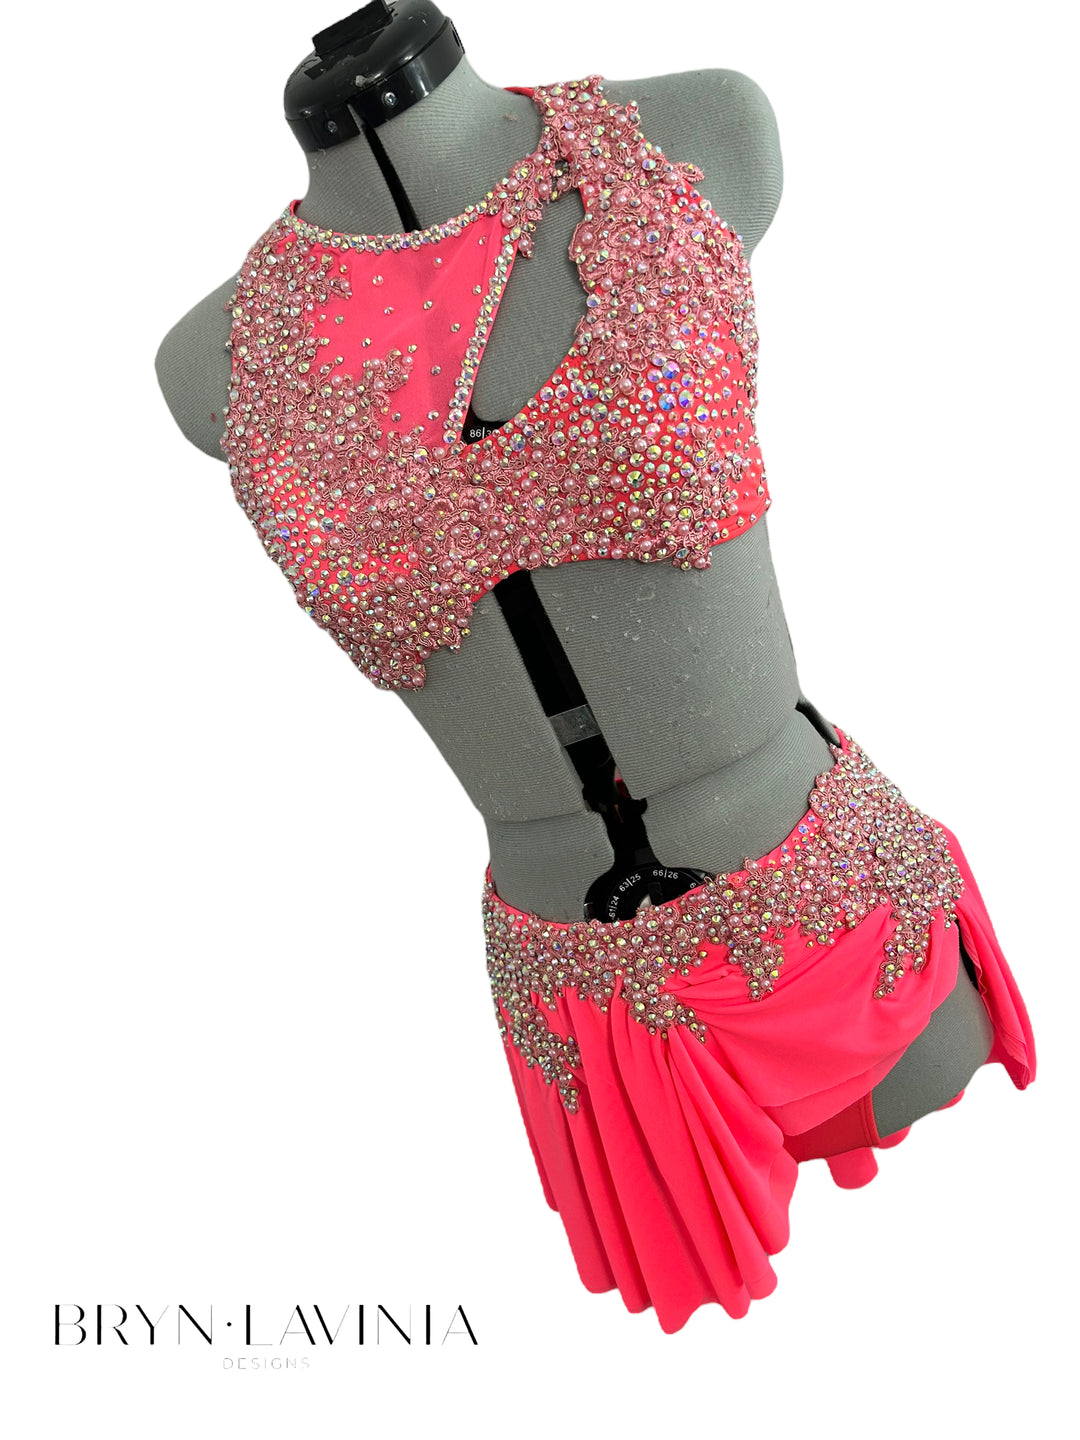 NEW AS bright coral/pink ready to ship costume